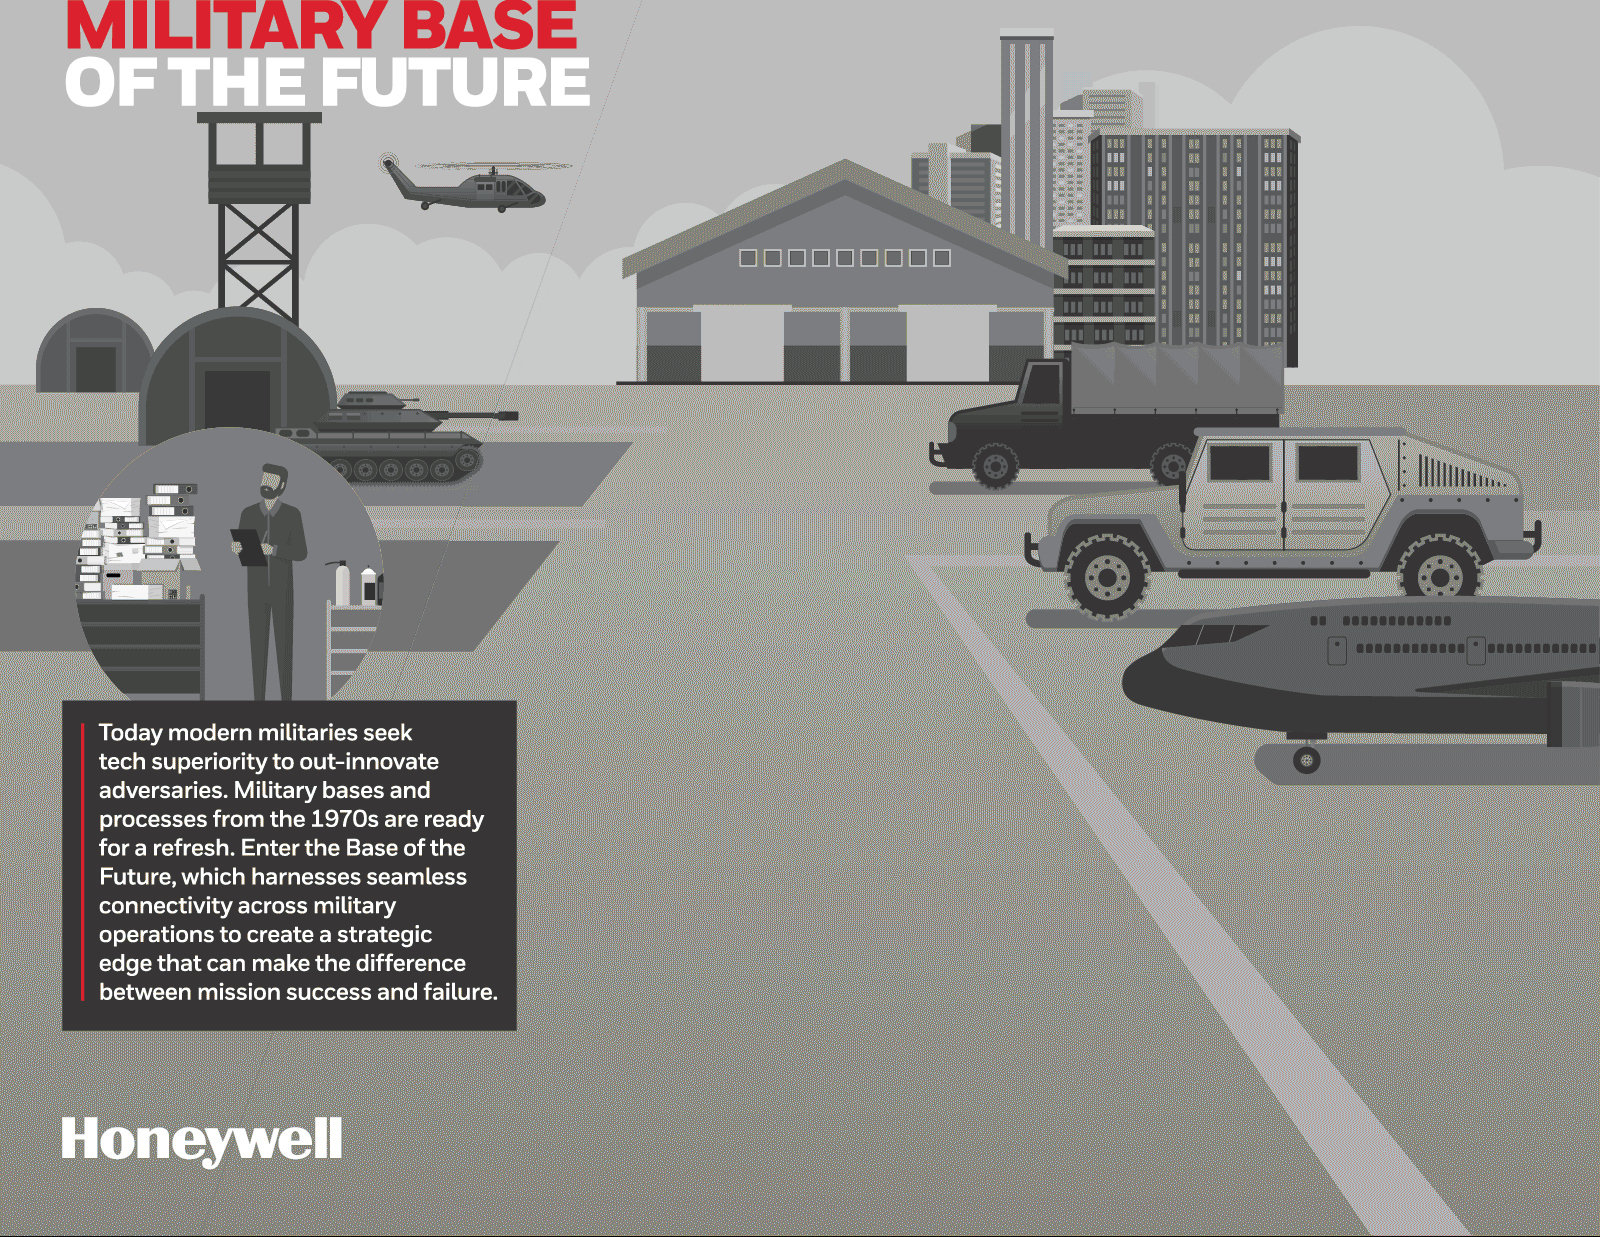 Illustration of a connected future military base